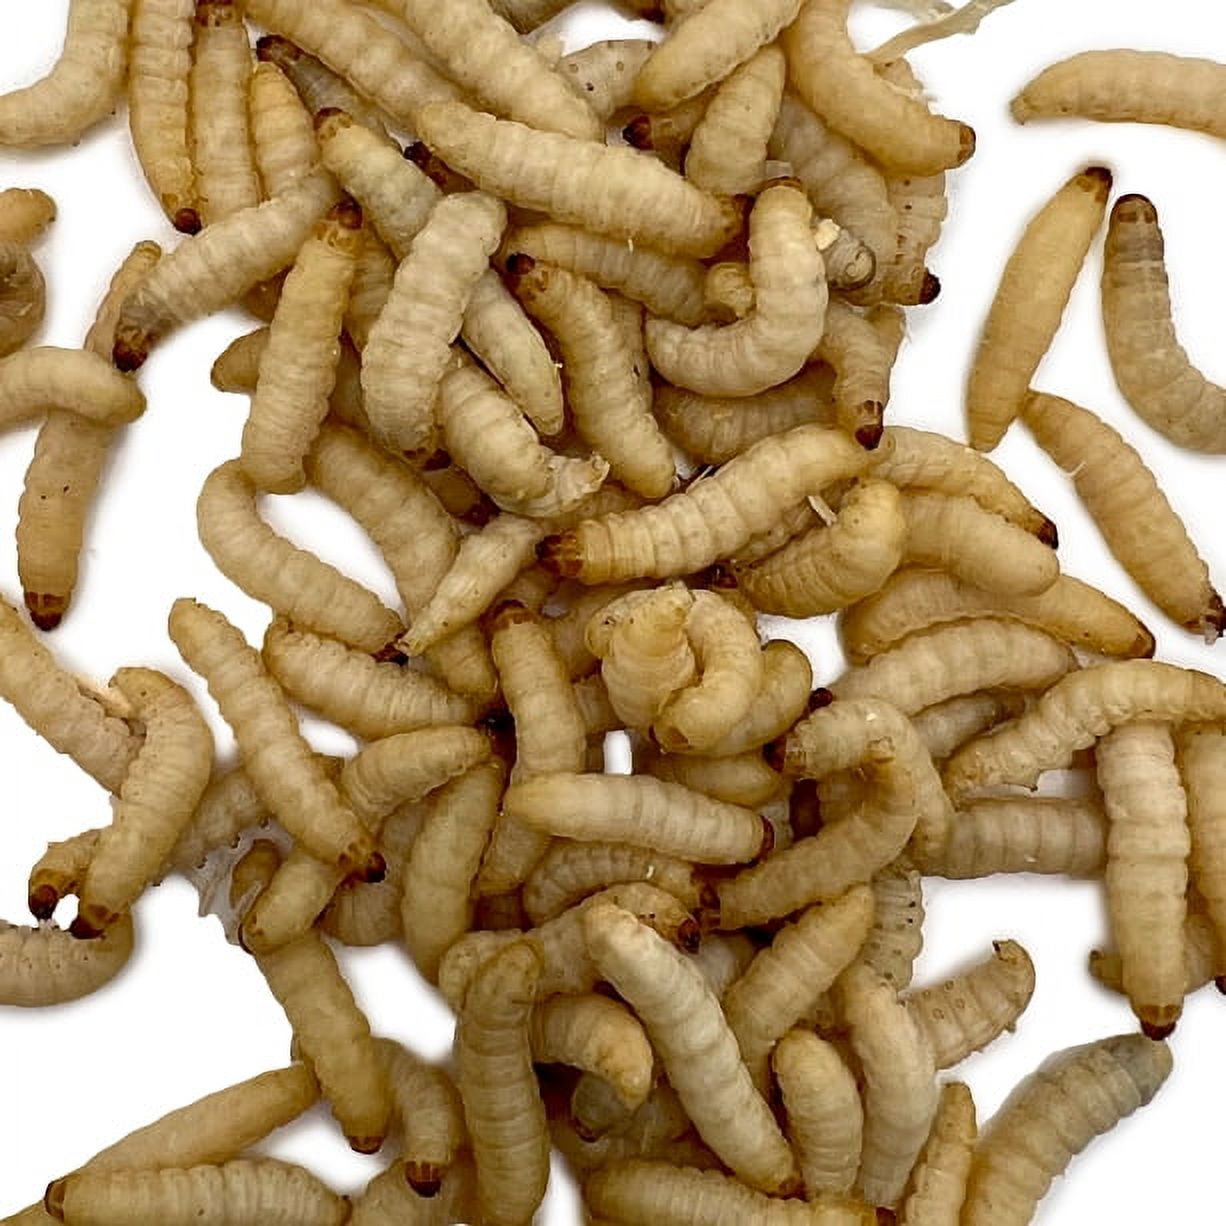 Speedy Worm Live Wax Worms - 500 Count (2 Cups) / Fishing Bait